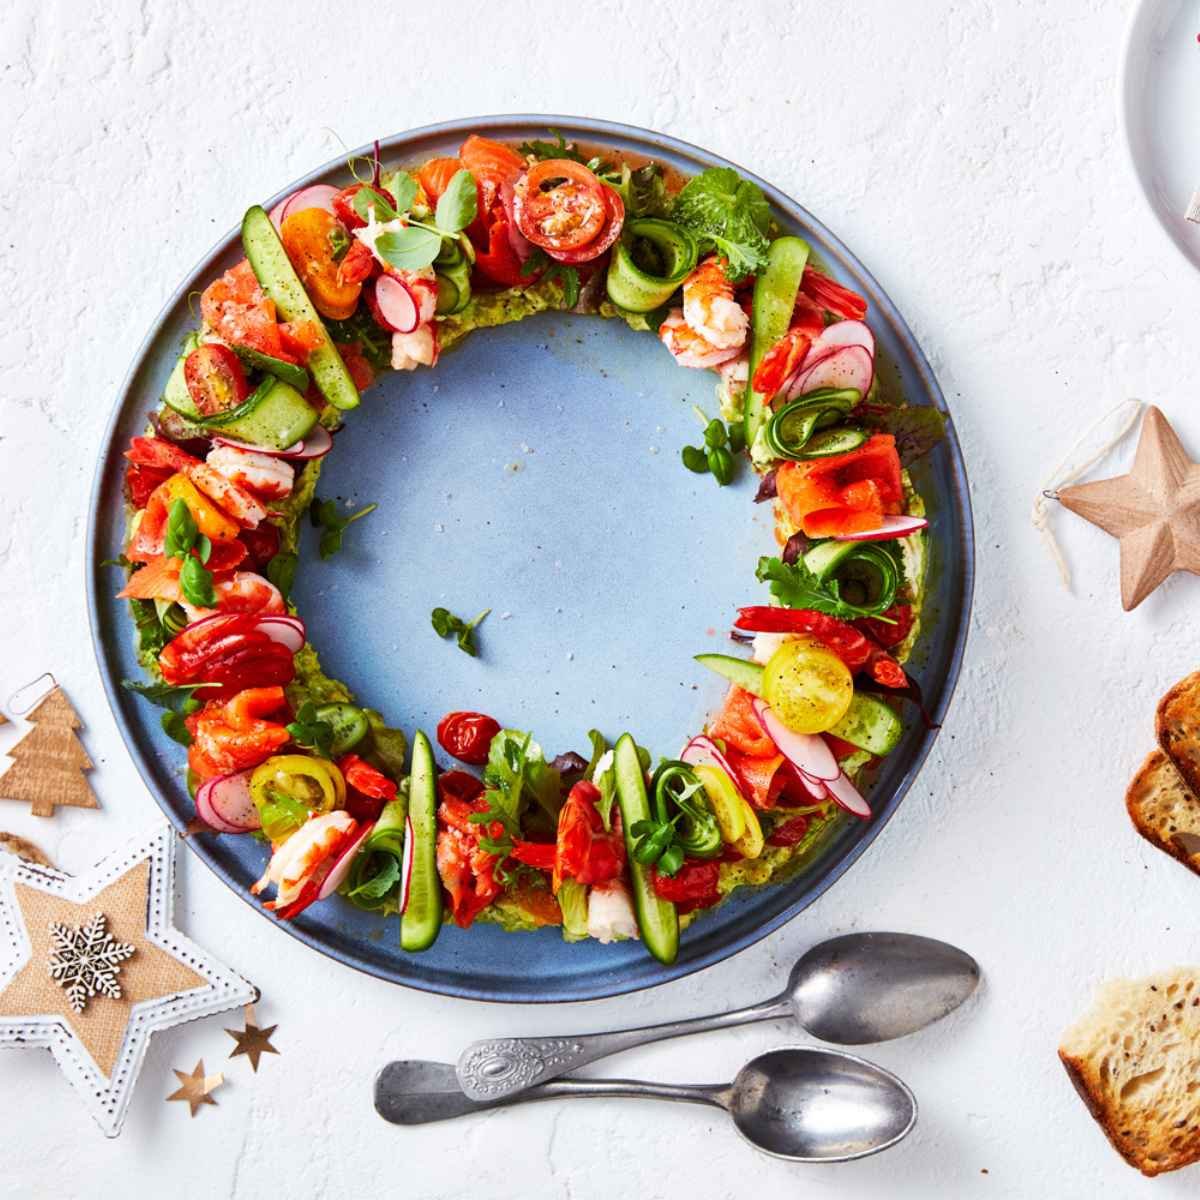 A wreath made with prawns, salmon, Qukes cucumbers, mix-a-mato tomatoes and petite tomatoes. On the side are spoons and Christmas ornaments.